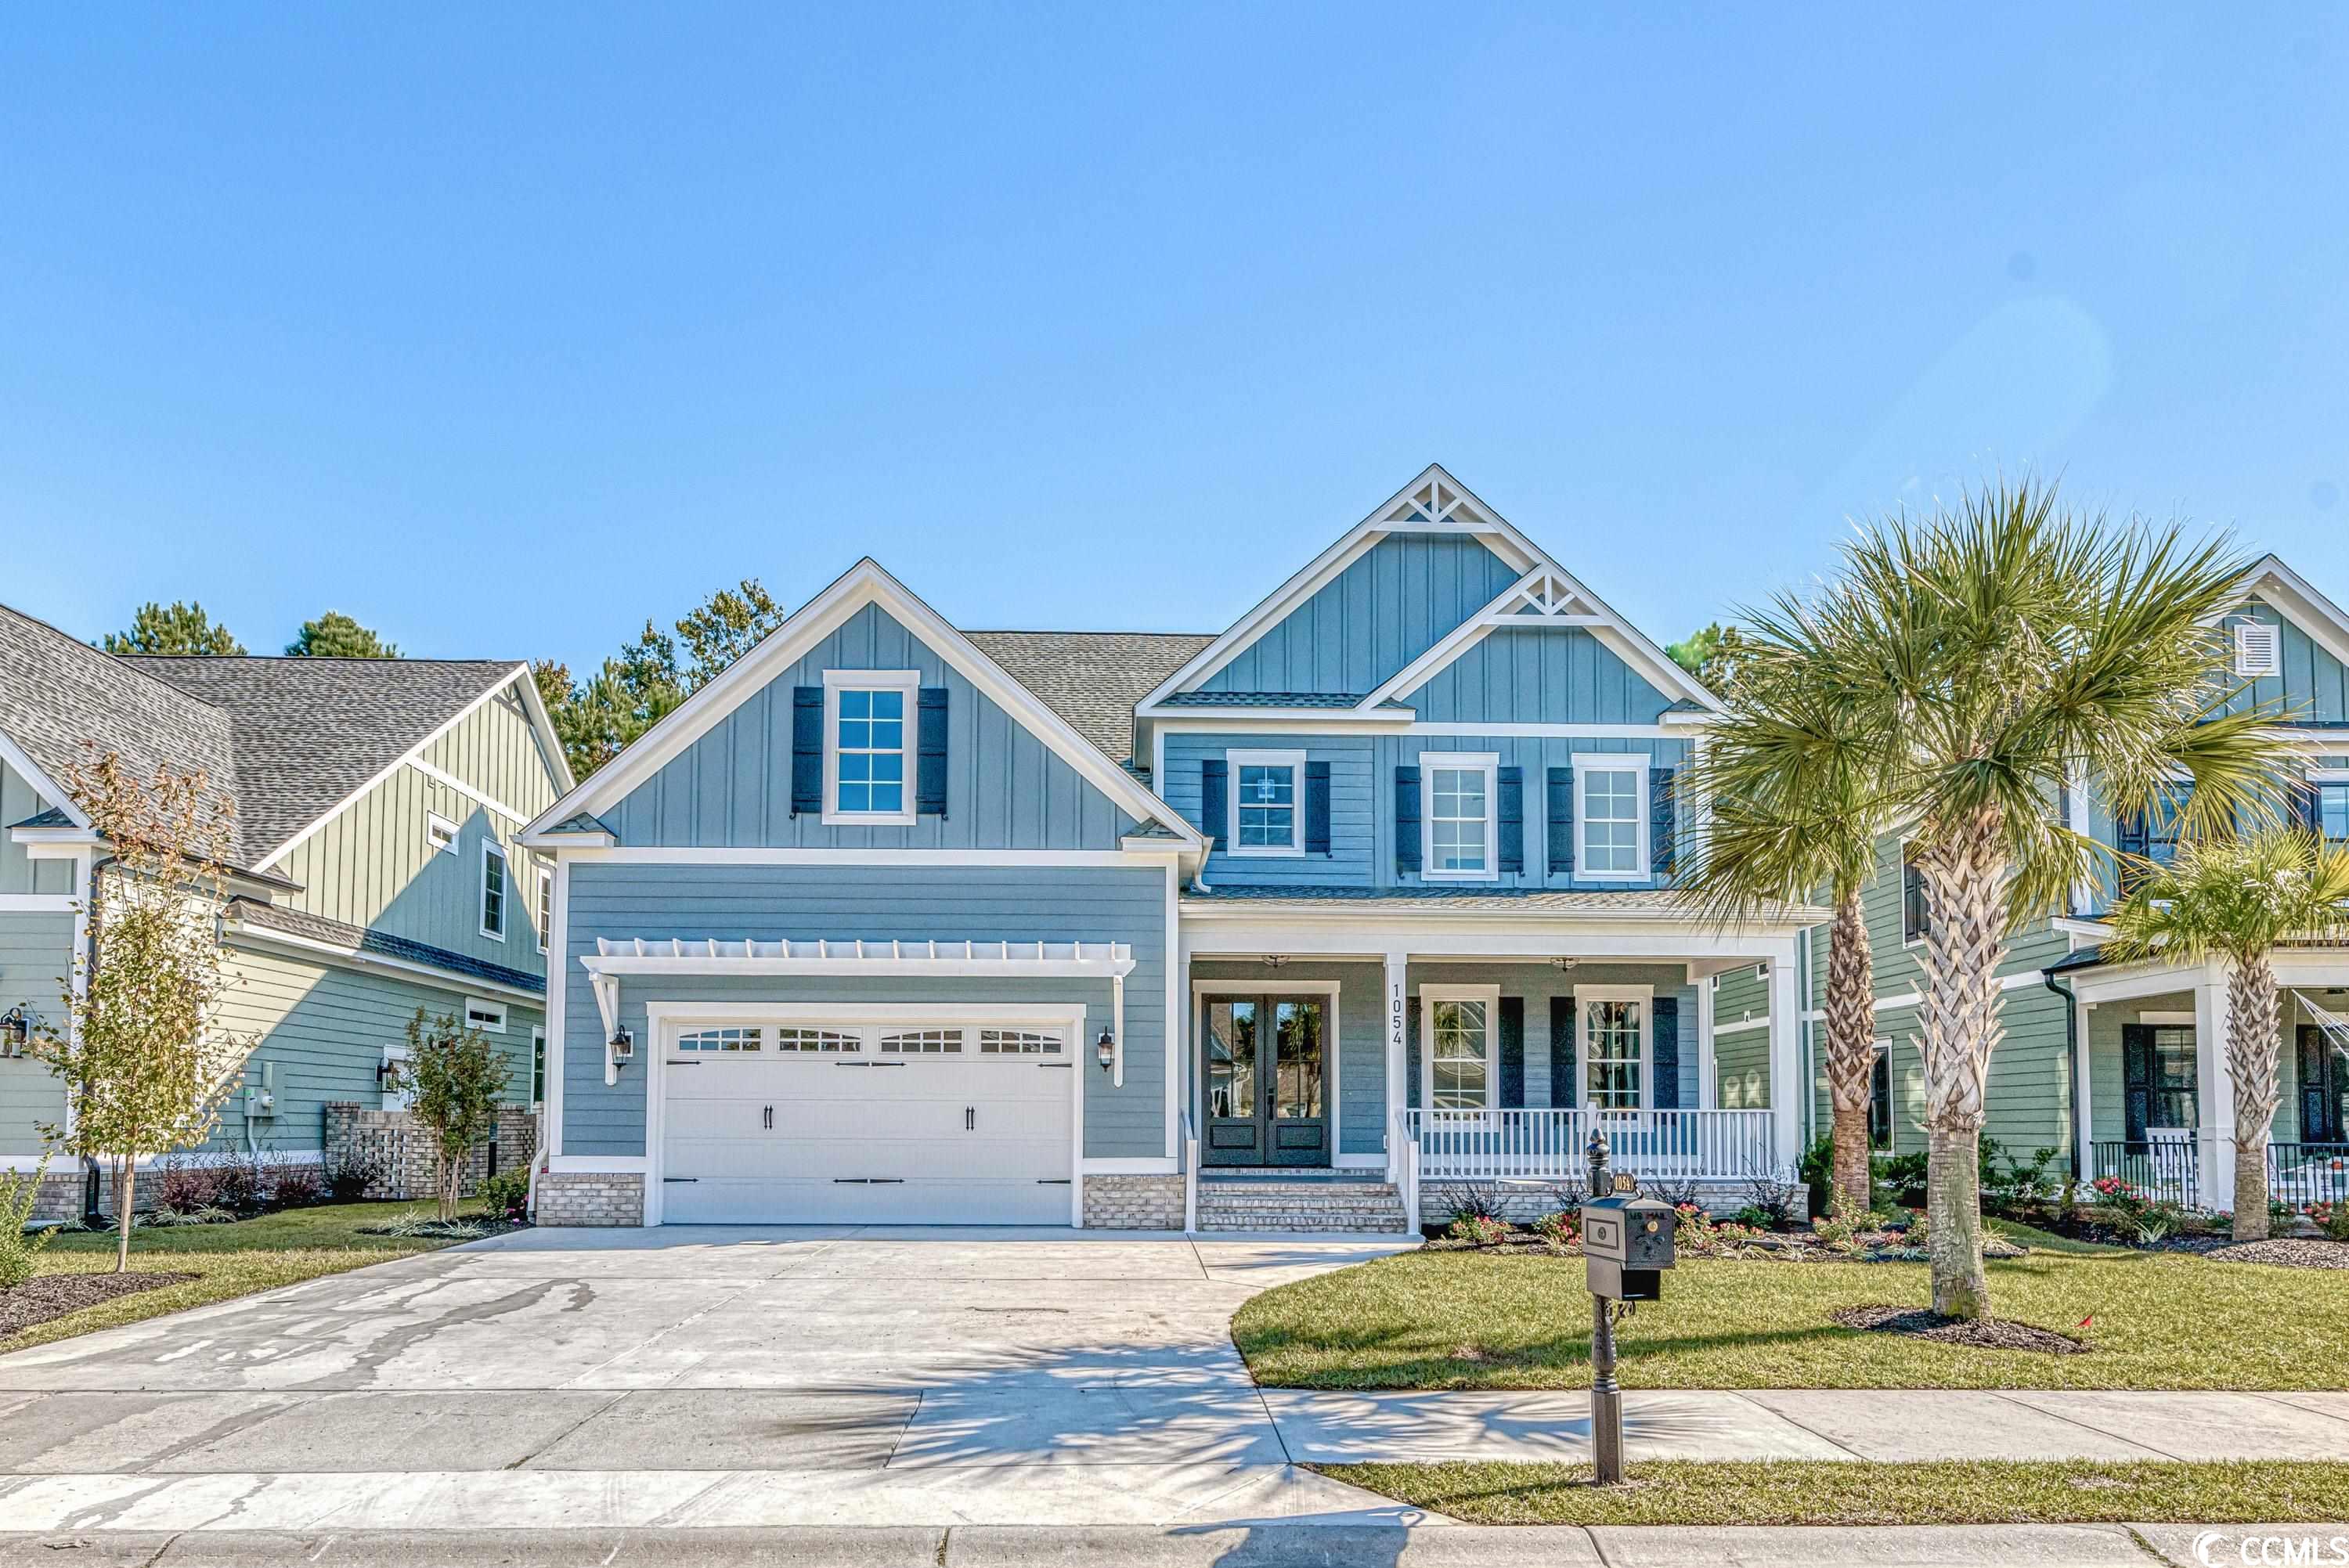 1054 East Isle of Palms Ave. Myrtle Beach, SC 29579